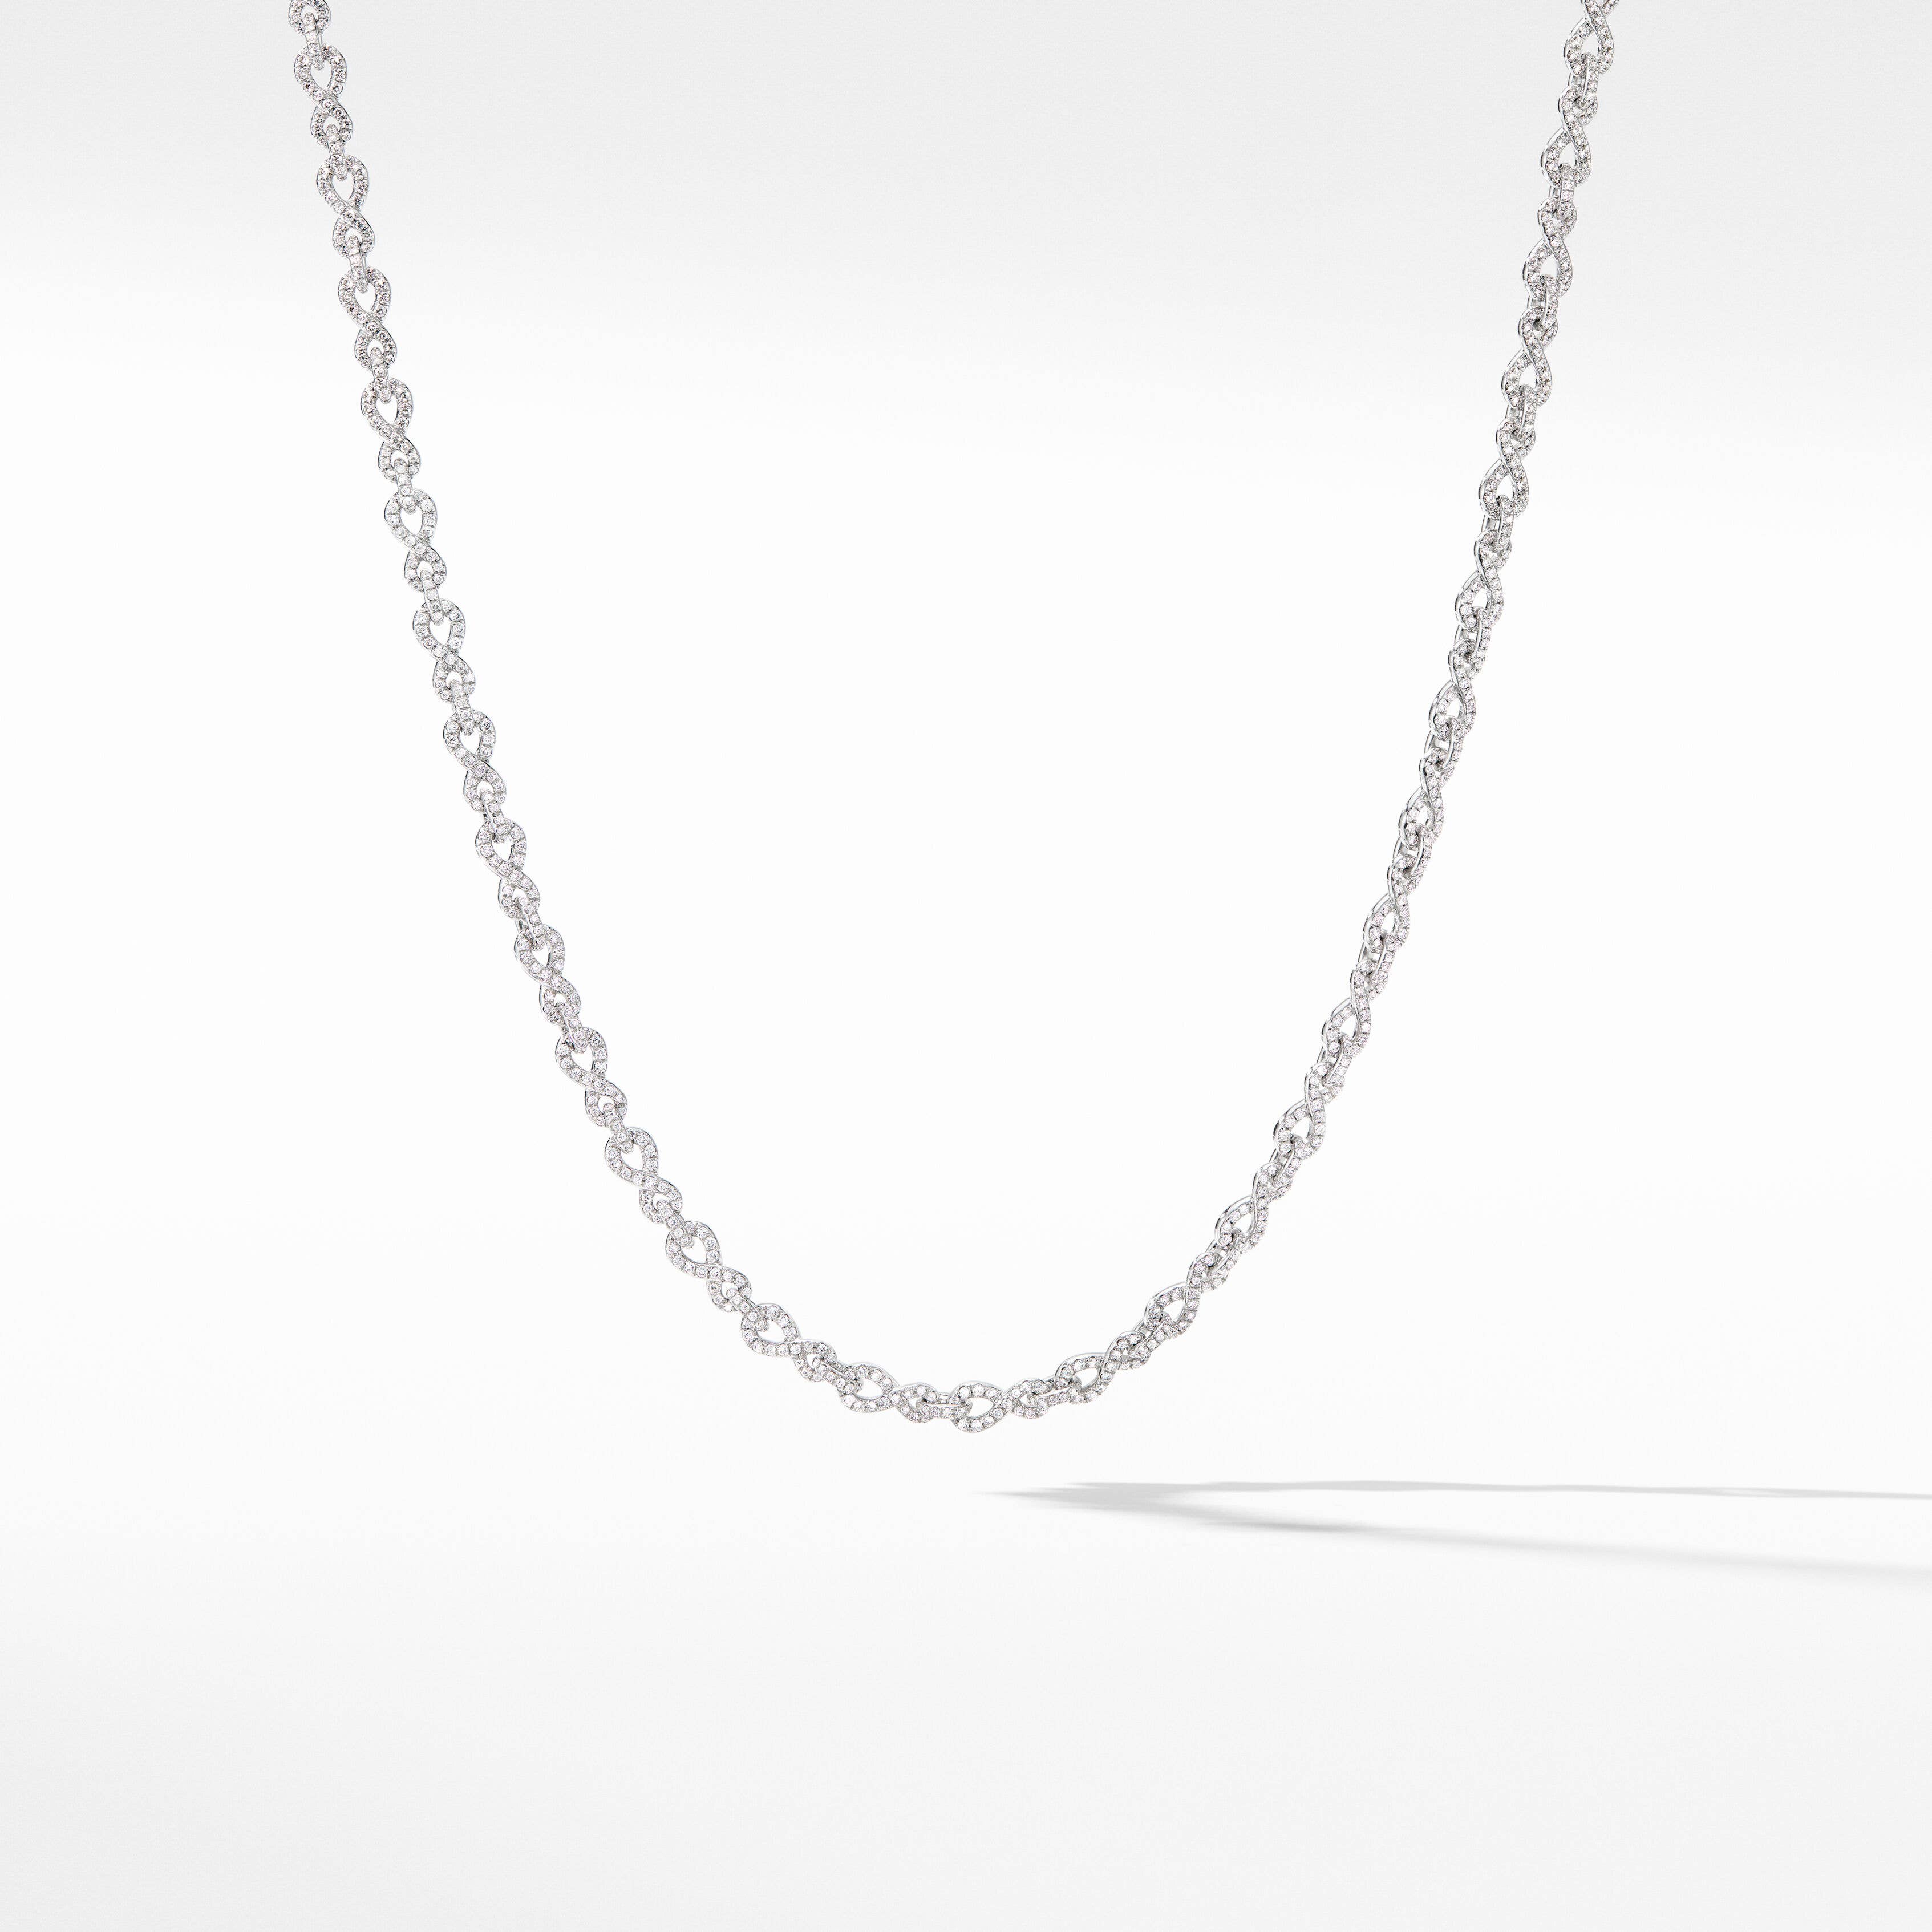 Pavé Infinity Twist Chain Necklace in White Gold with Diamonds